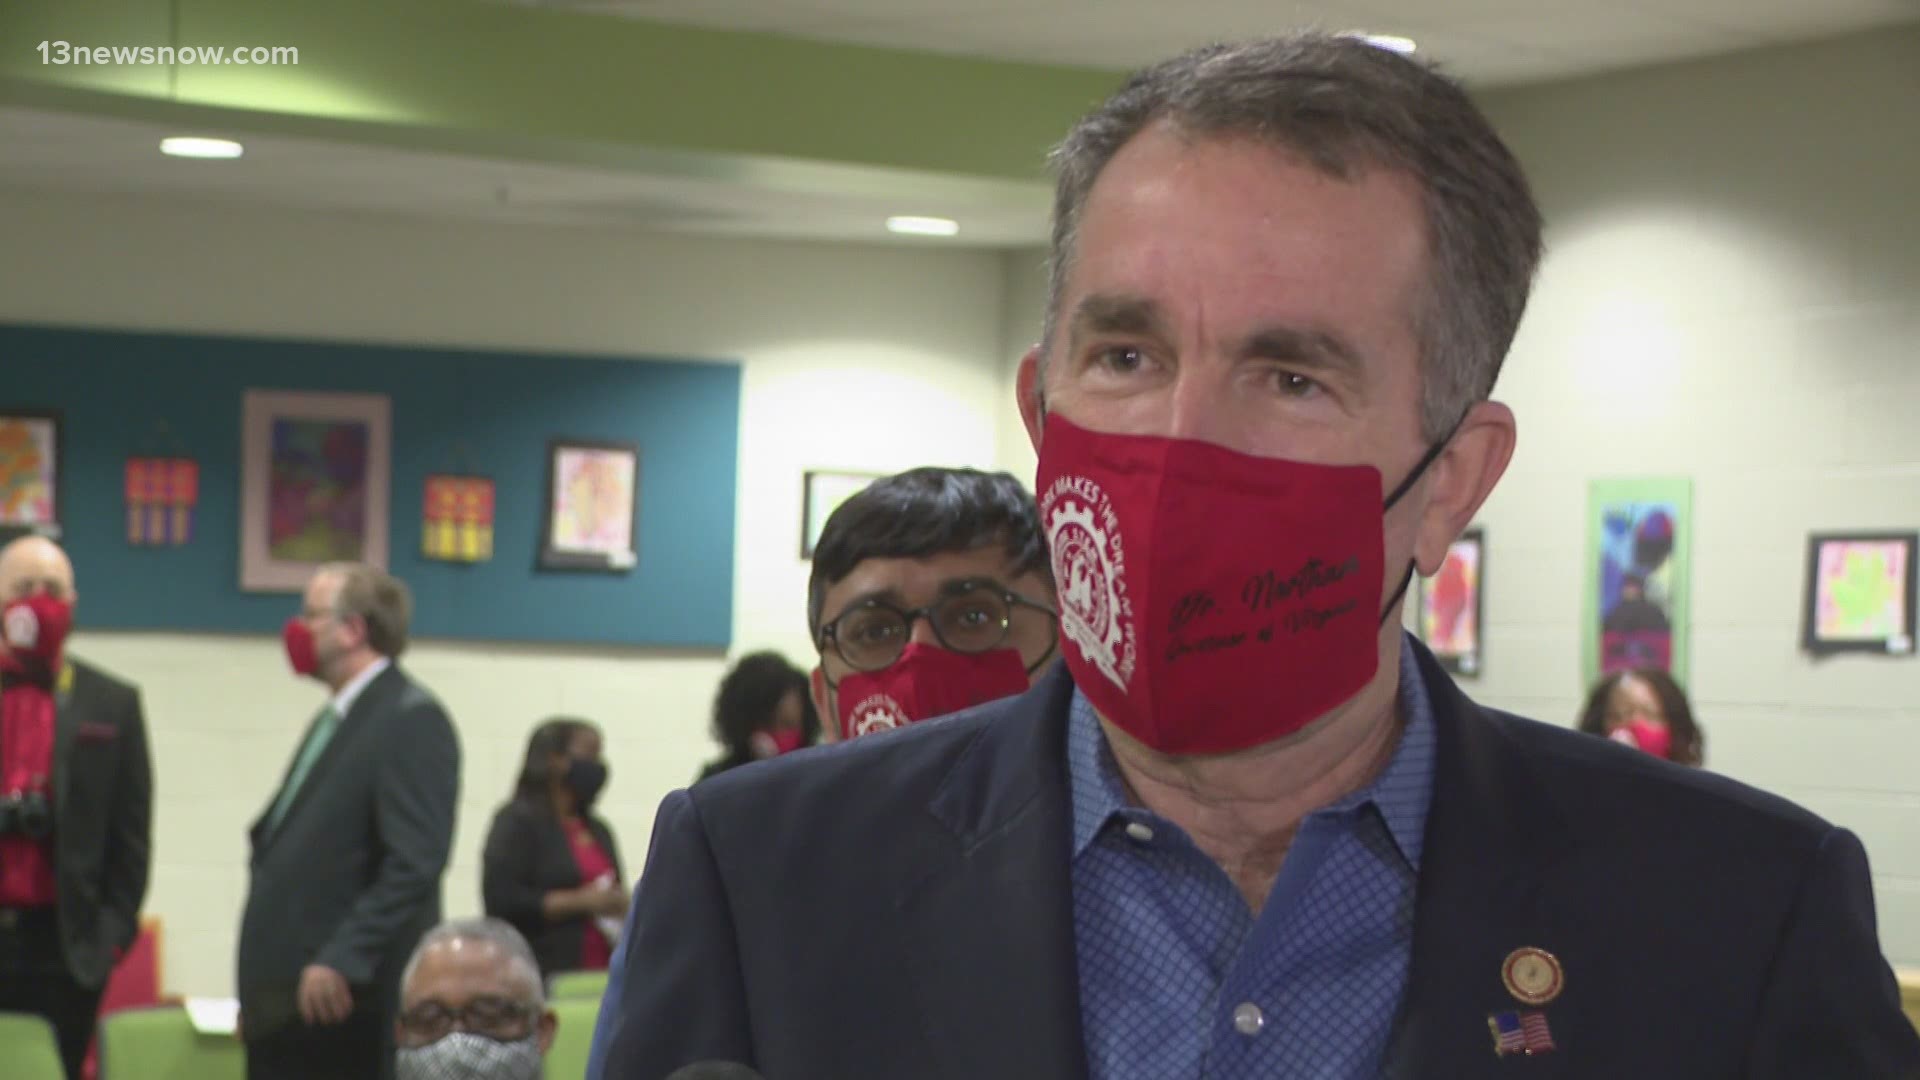 Gov. Northam visited Southside STEM Academy at Campostella as students returned to classrooms Monday, and the teachers were already inside, excited to greet them.